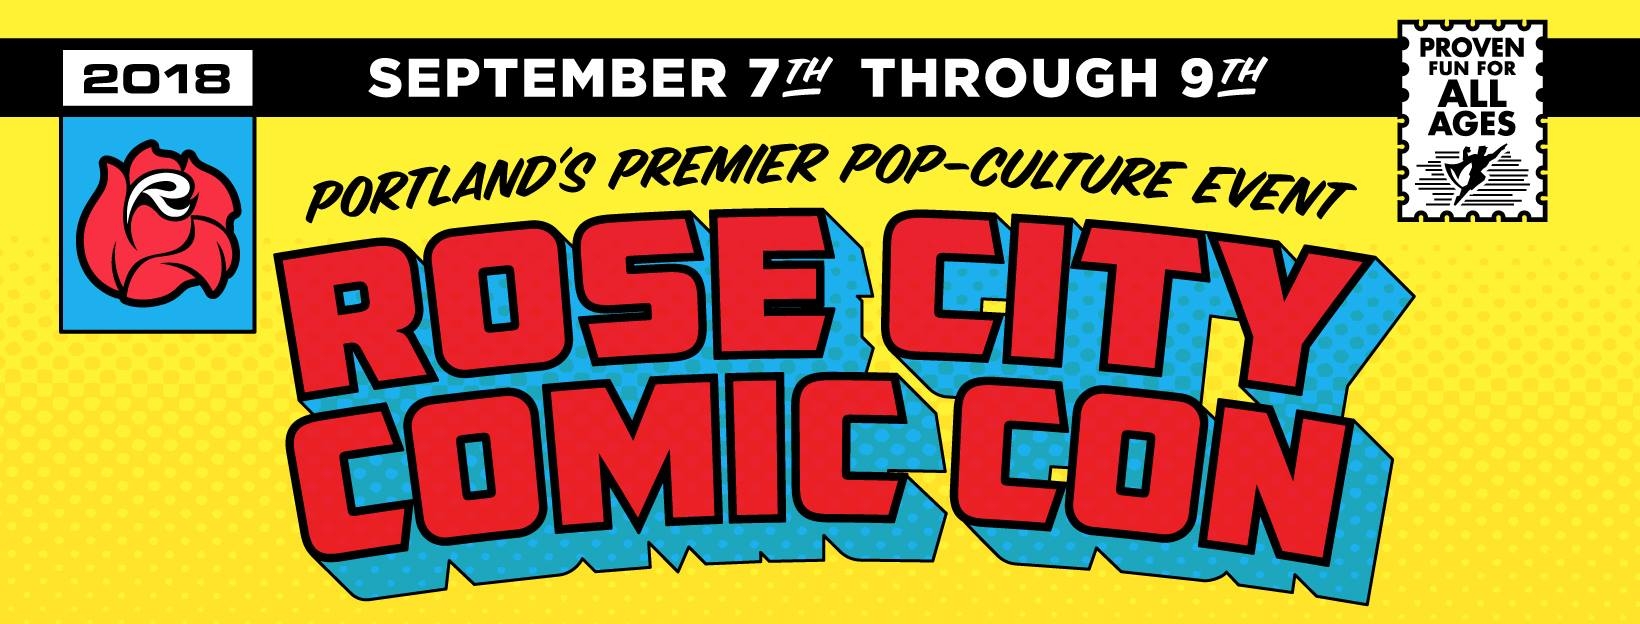 COMIC CON HIGHWAY WESTERN EXIT:: -OR- Rose City Comic Con FEATURING::  DALE LAZAROV   (Sept 7 – 9)